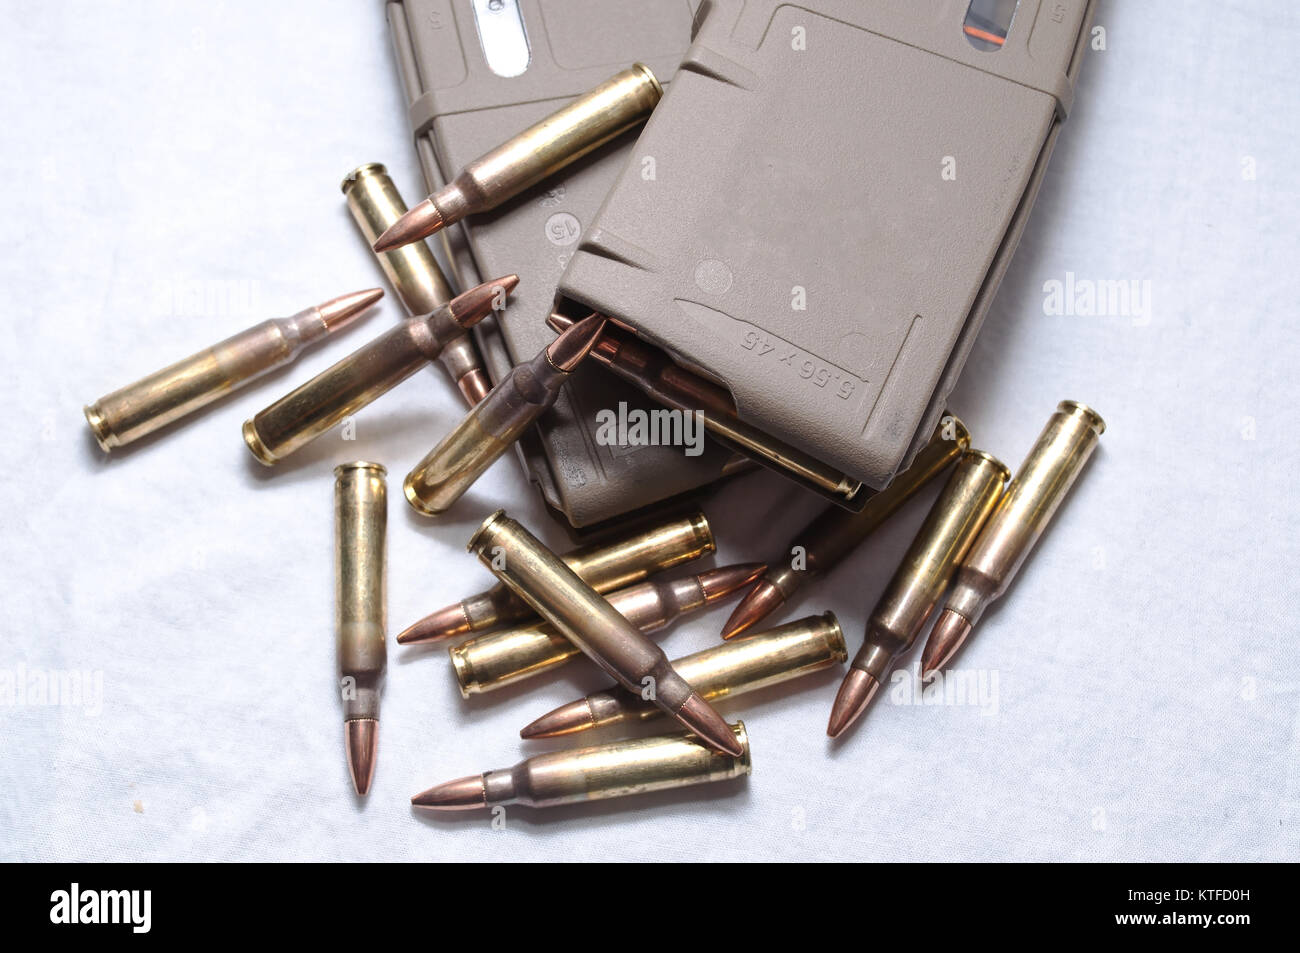 Two brown rifle magazines loaded with .223 rounds and several rounds laying next to them on a white background Stock Photo